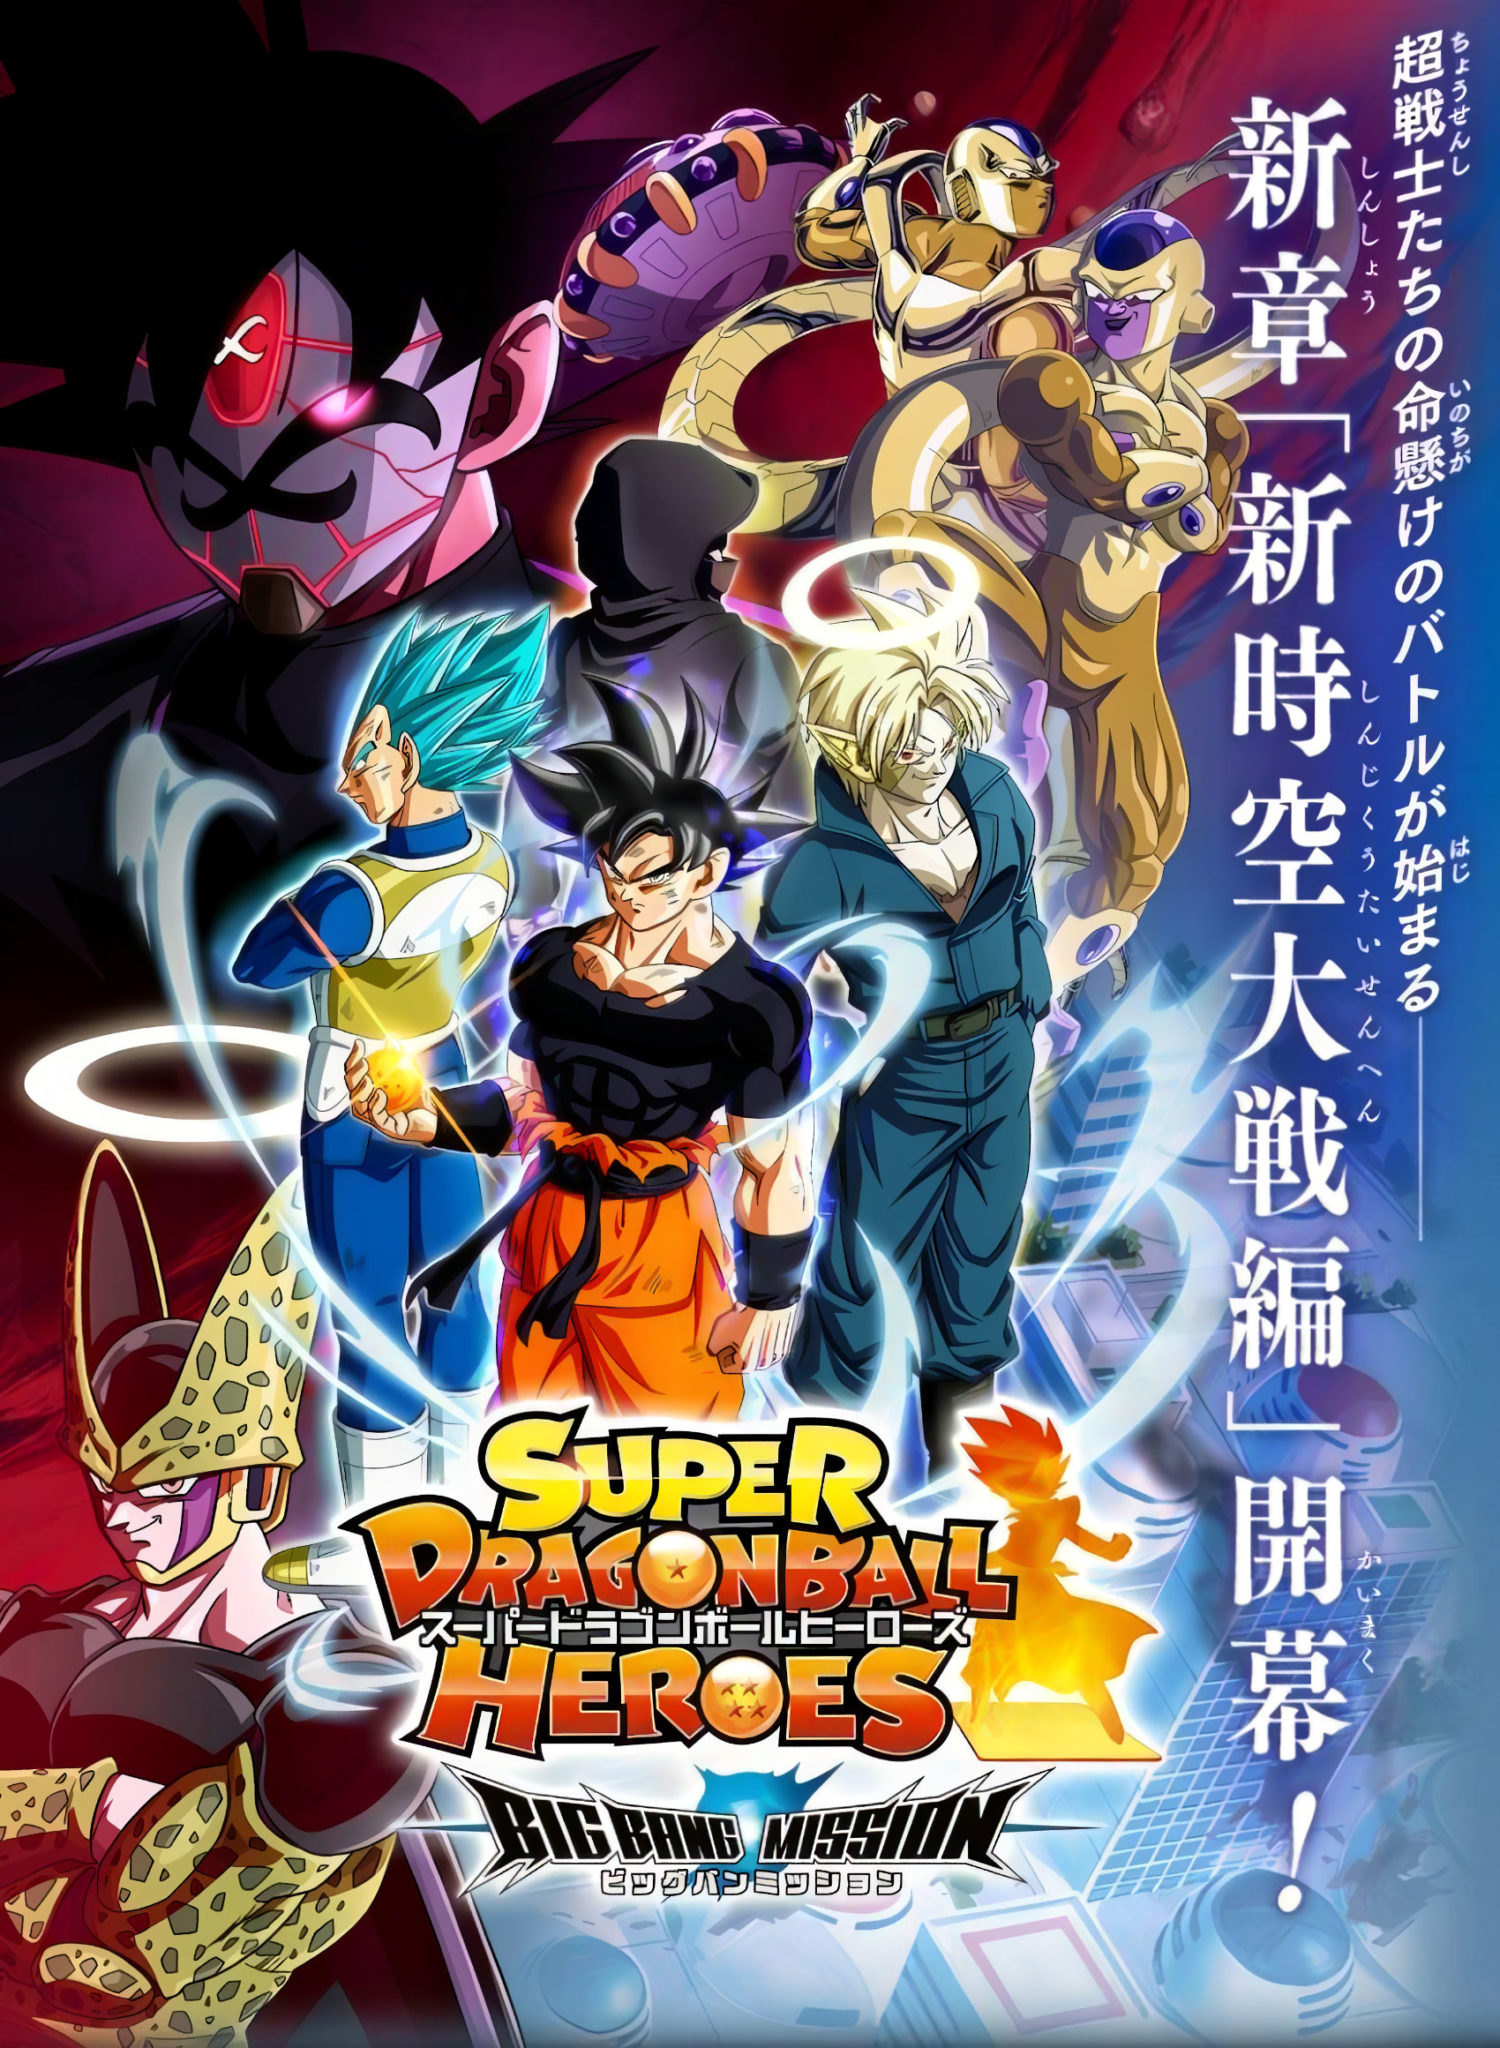 What is super dragon ball heroes - readyjuja